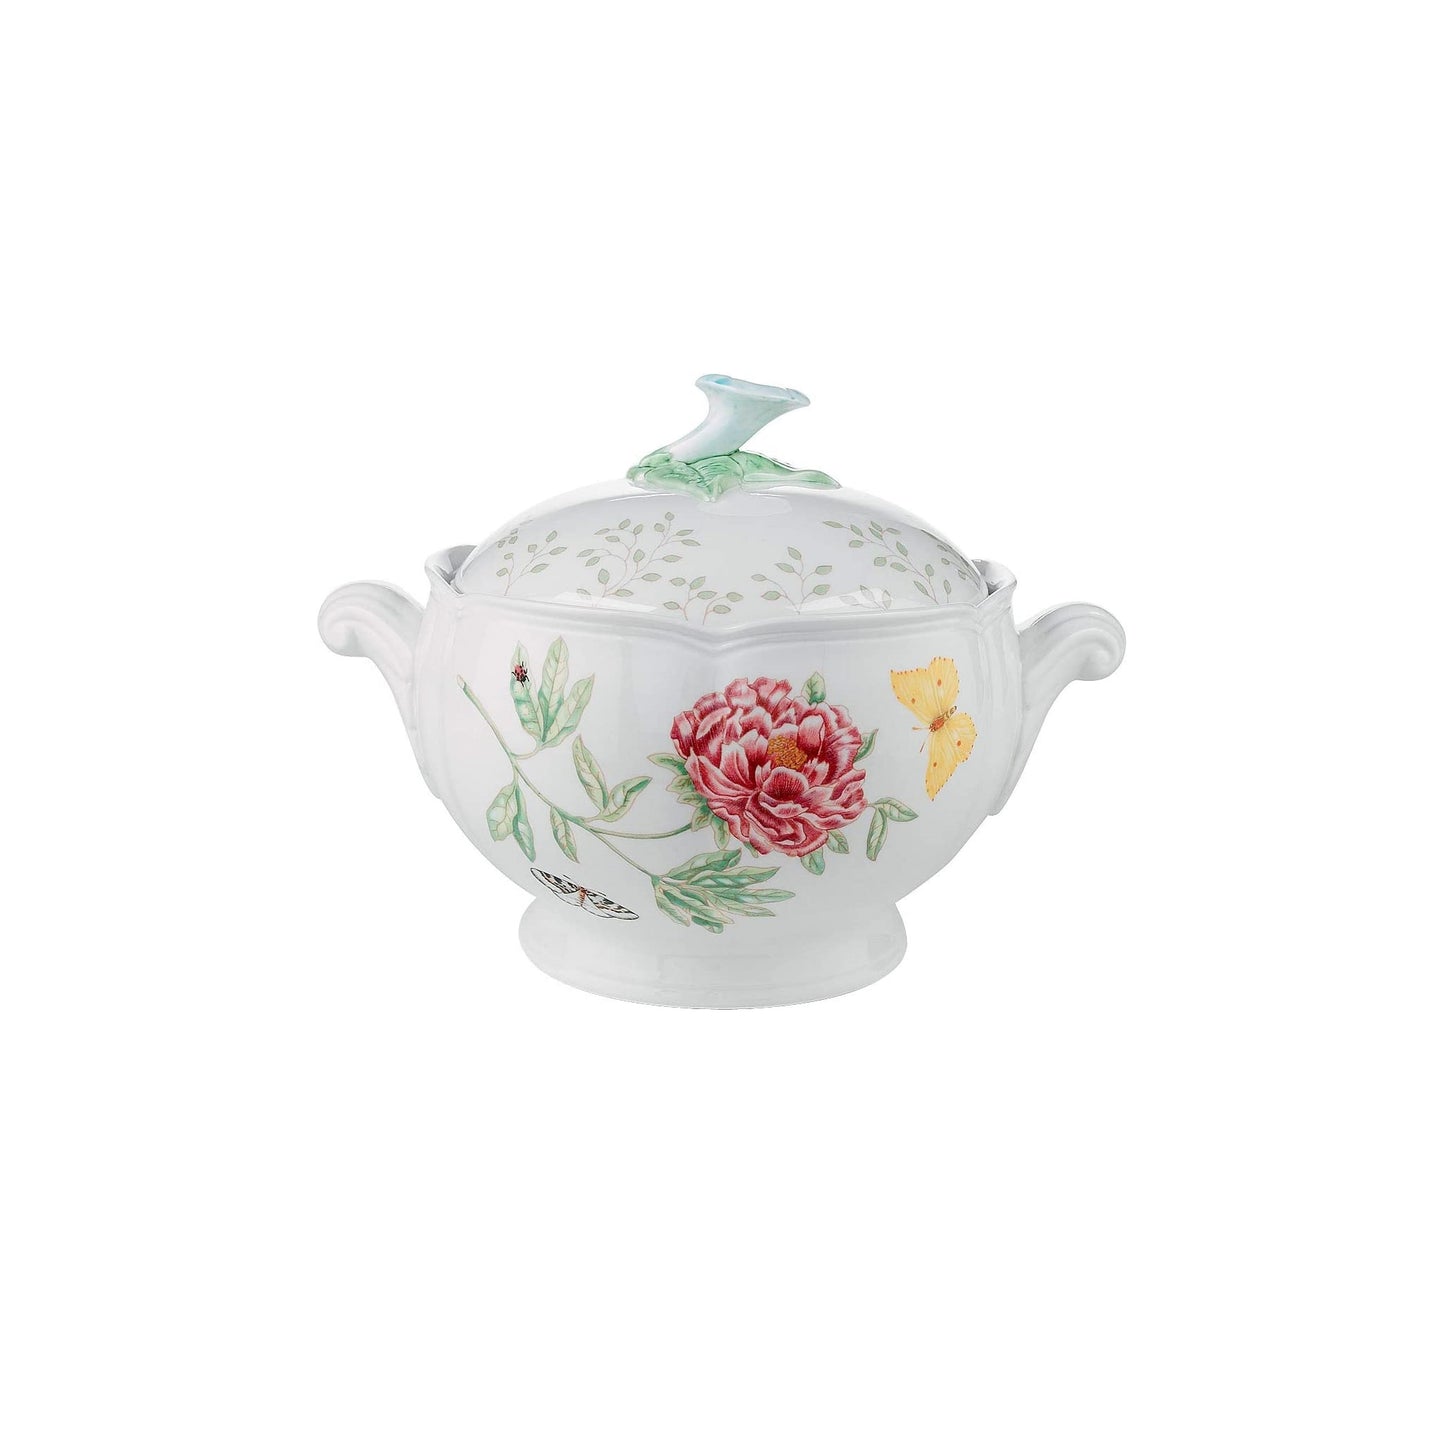 Butterfly Meadow® Covered Casserole with Ceramic Lid by Lenox